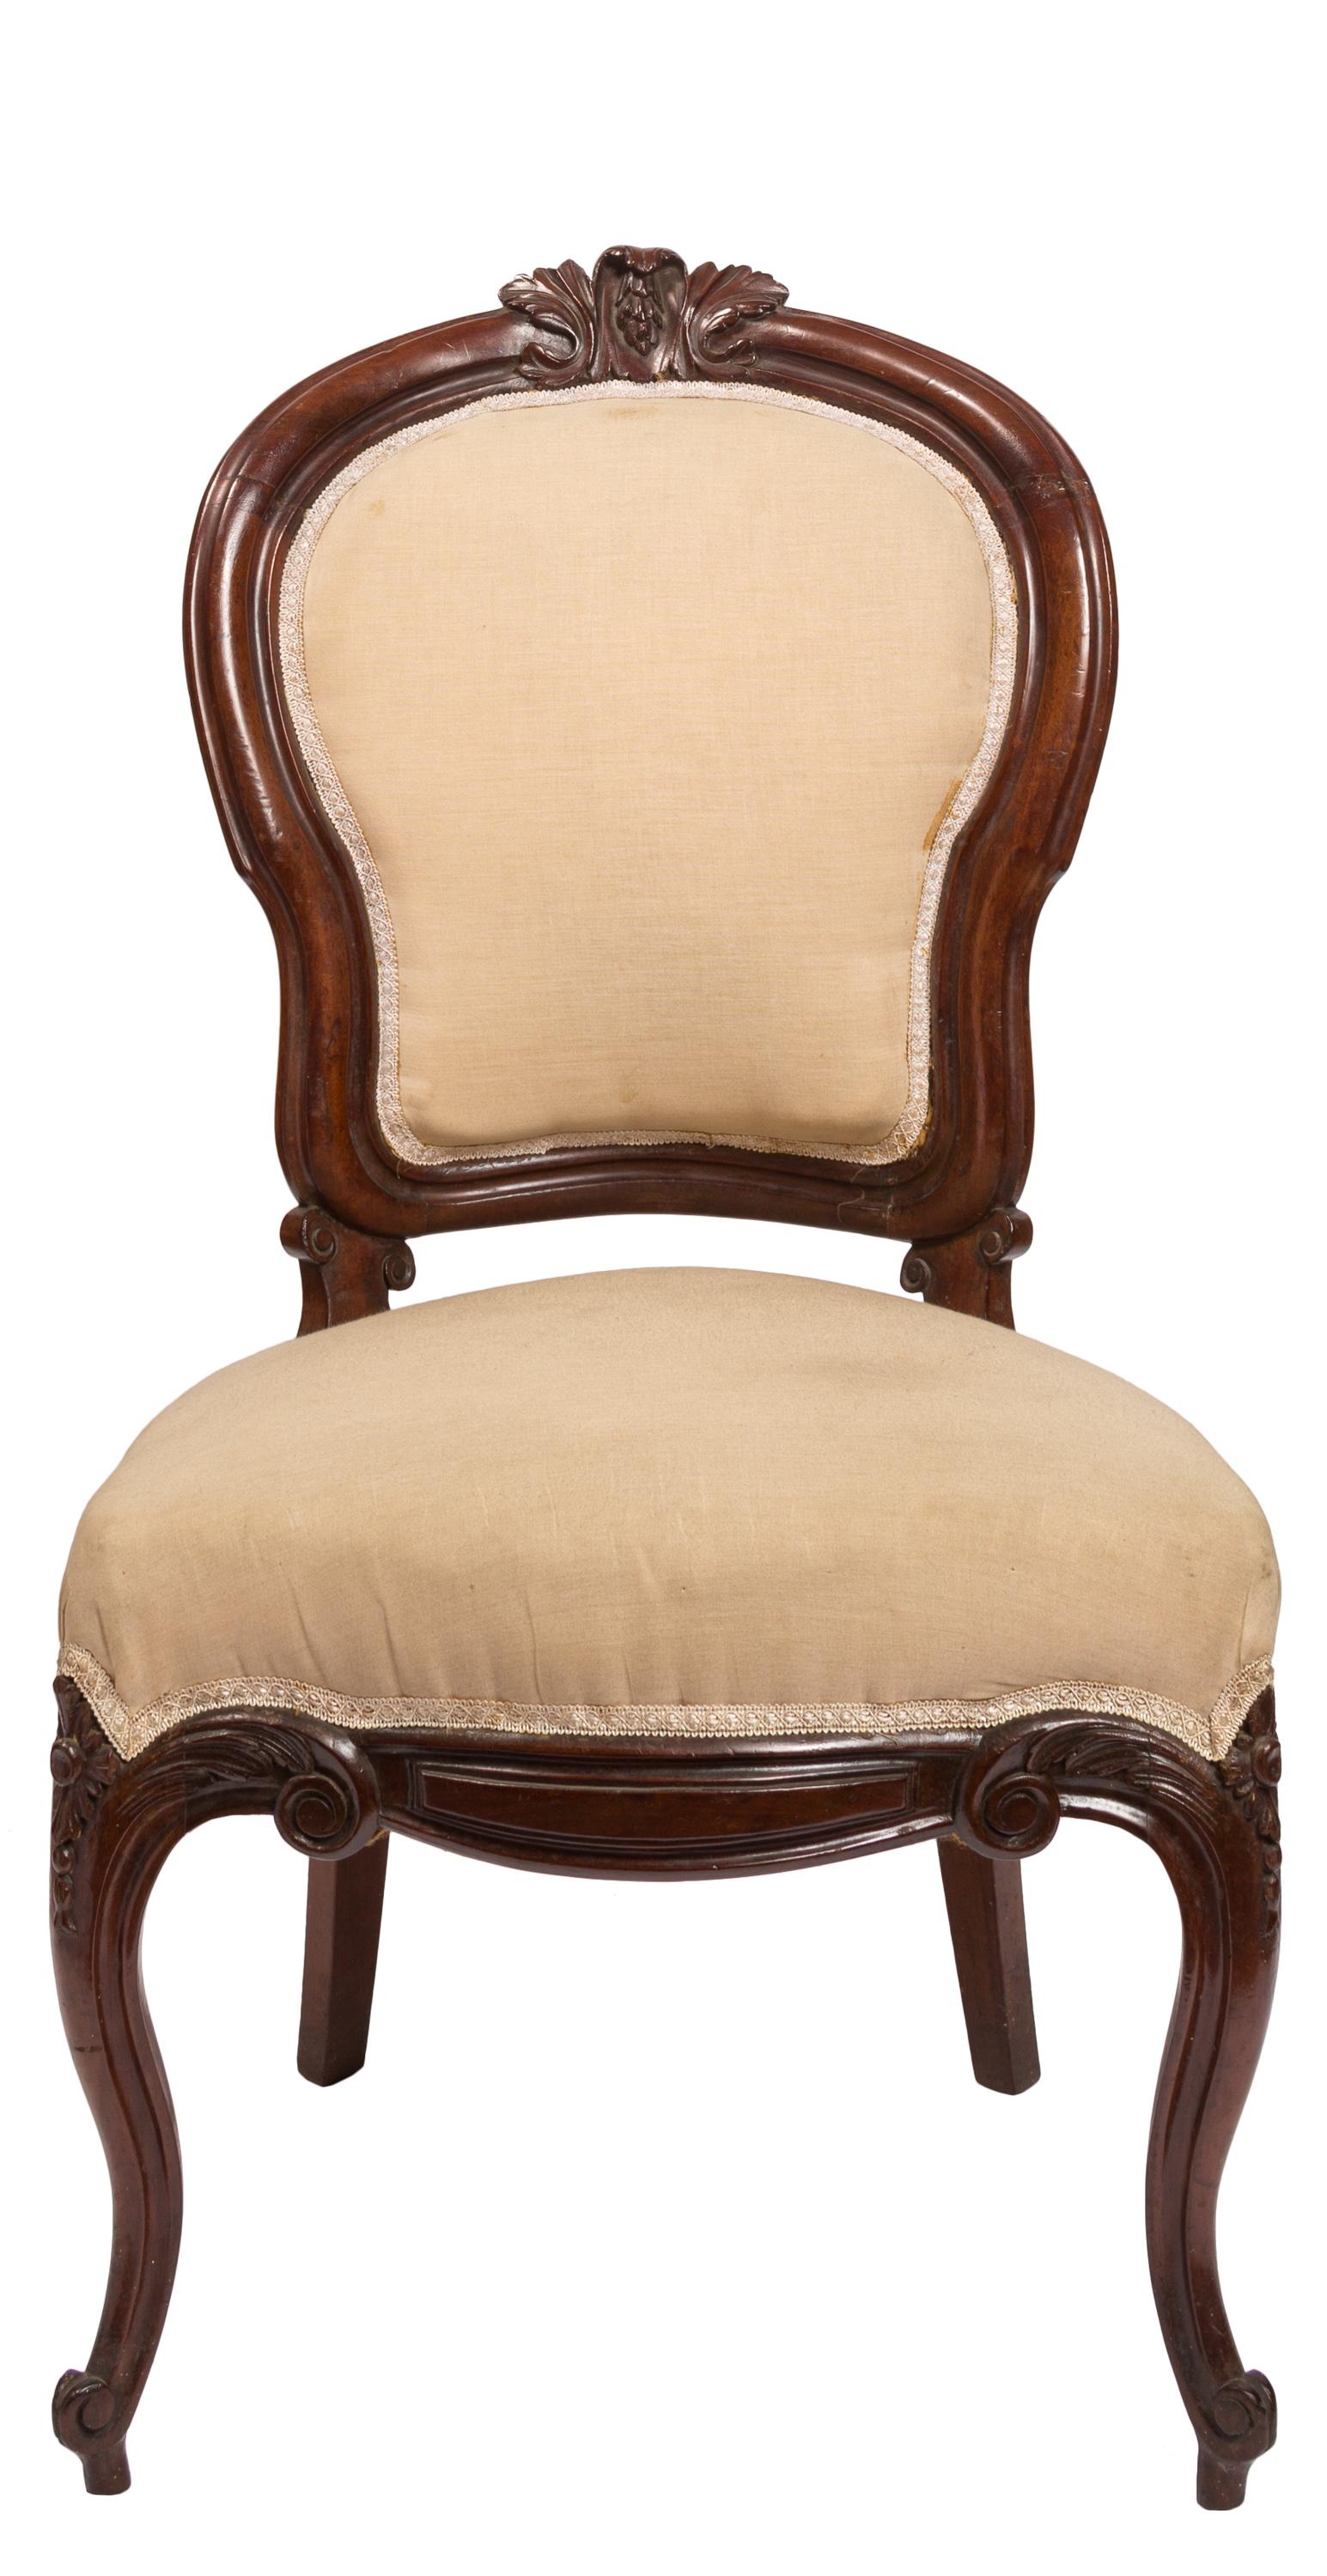 Set of Six Upholstered, Carved Spanish Isabelina / Victorian Period Side Chairs For Sale 6